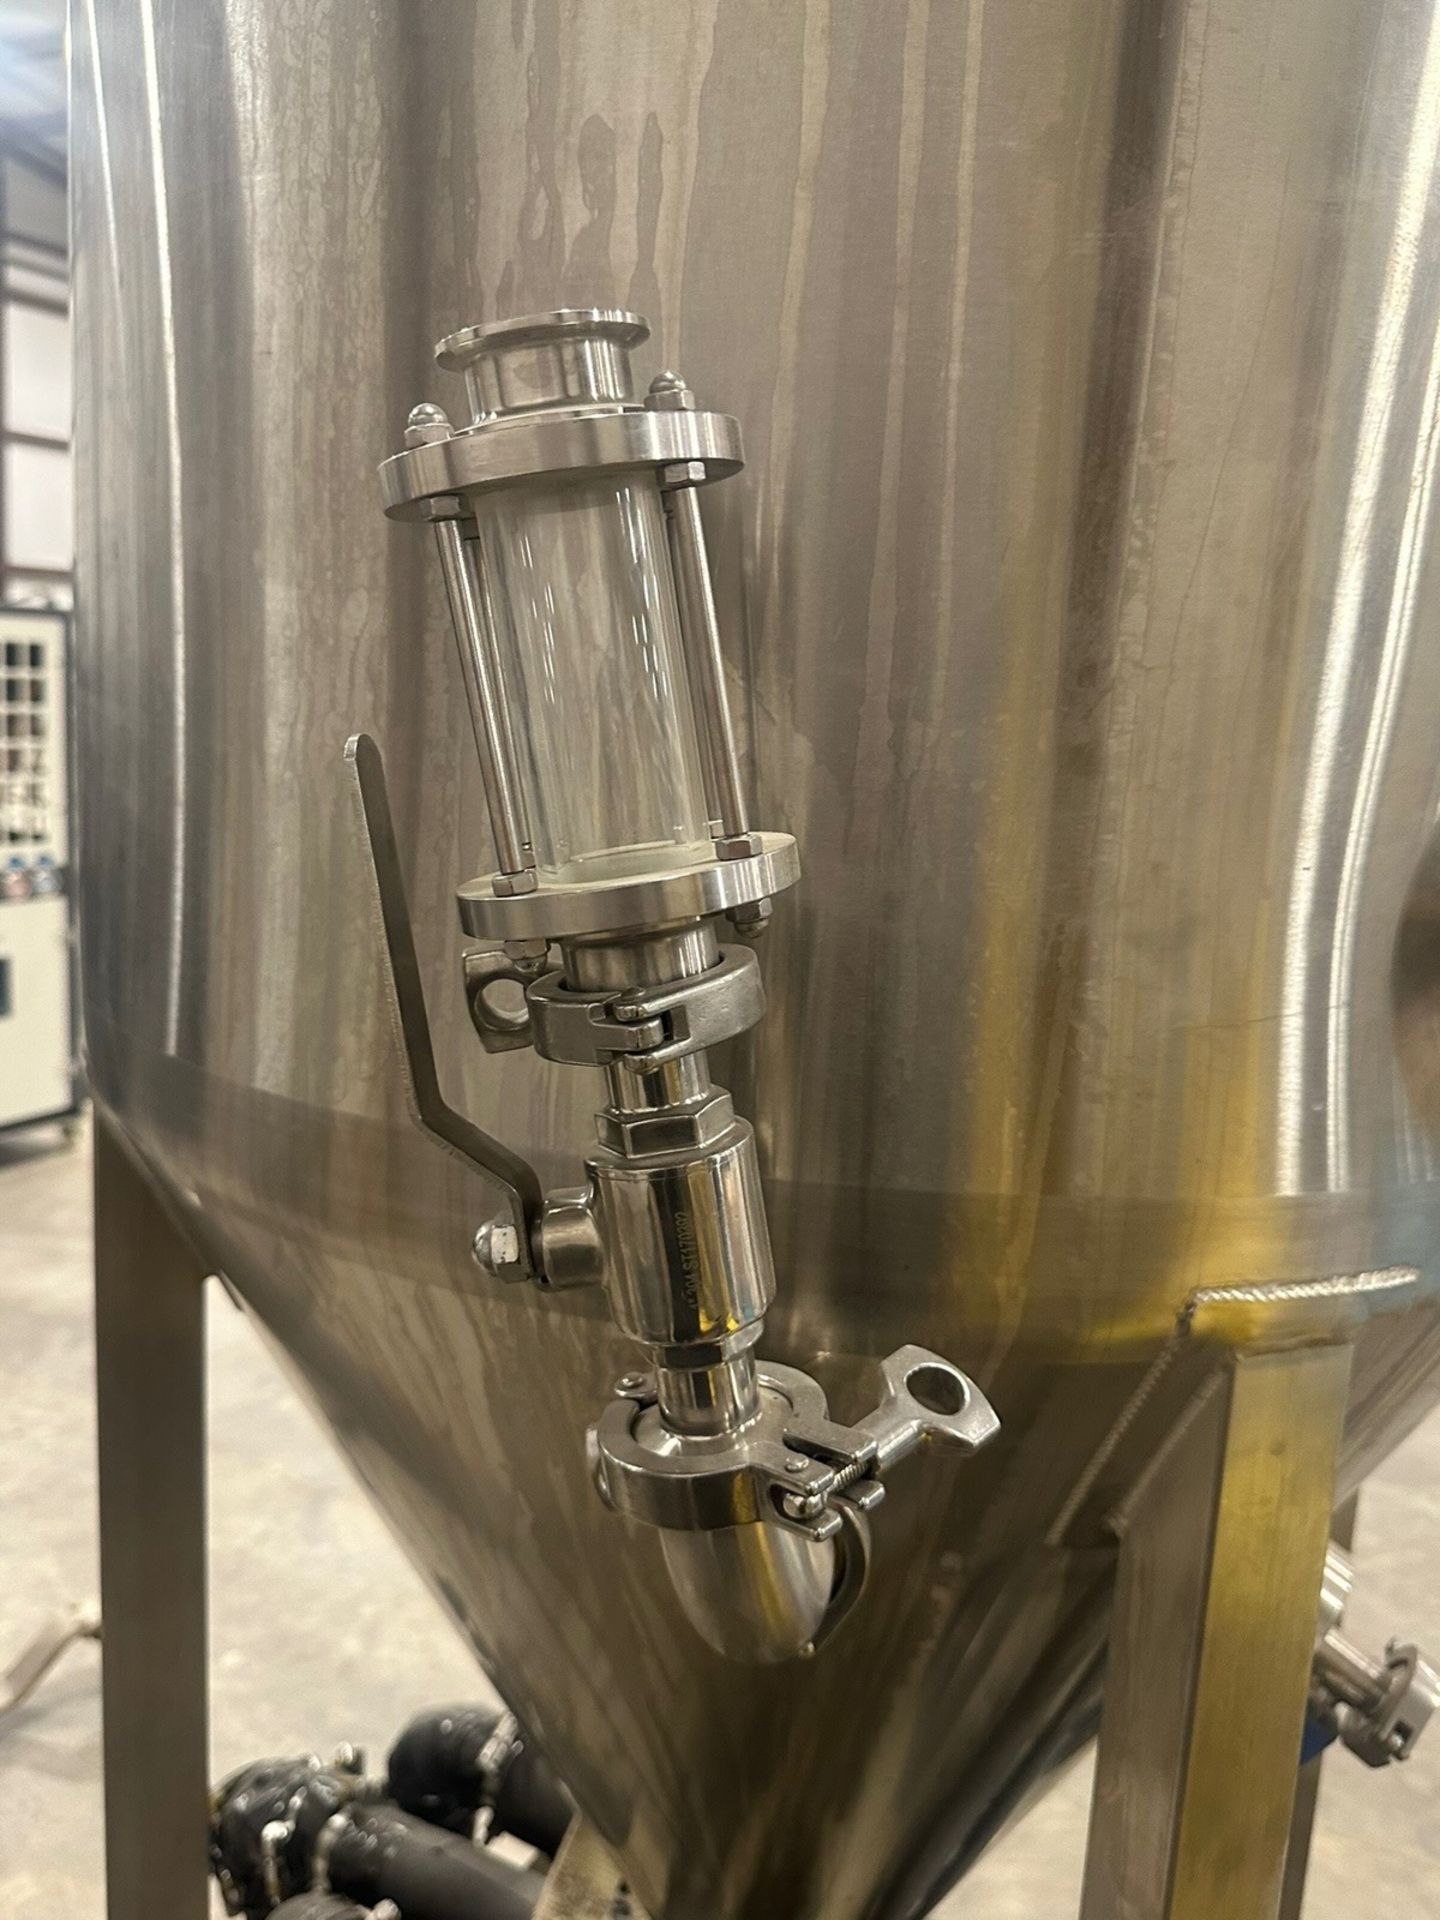 Stainless Steel Brew Tech Vessel | Rig Fee $100 - Image 3 of 7